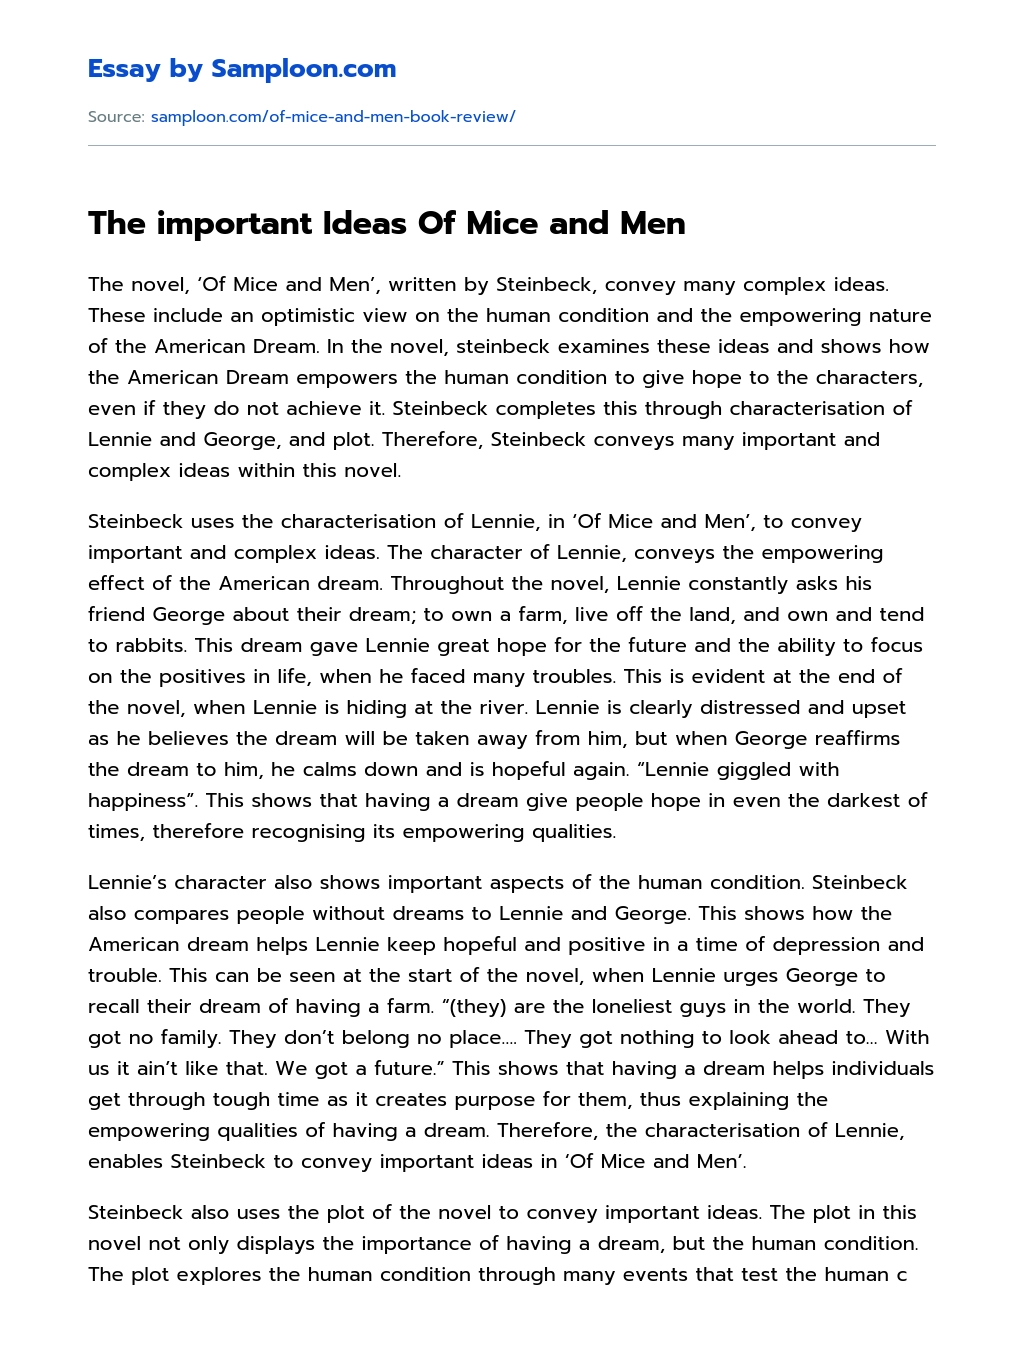 The important Ideas Of Mice and Men essay